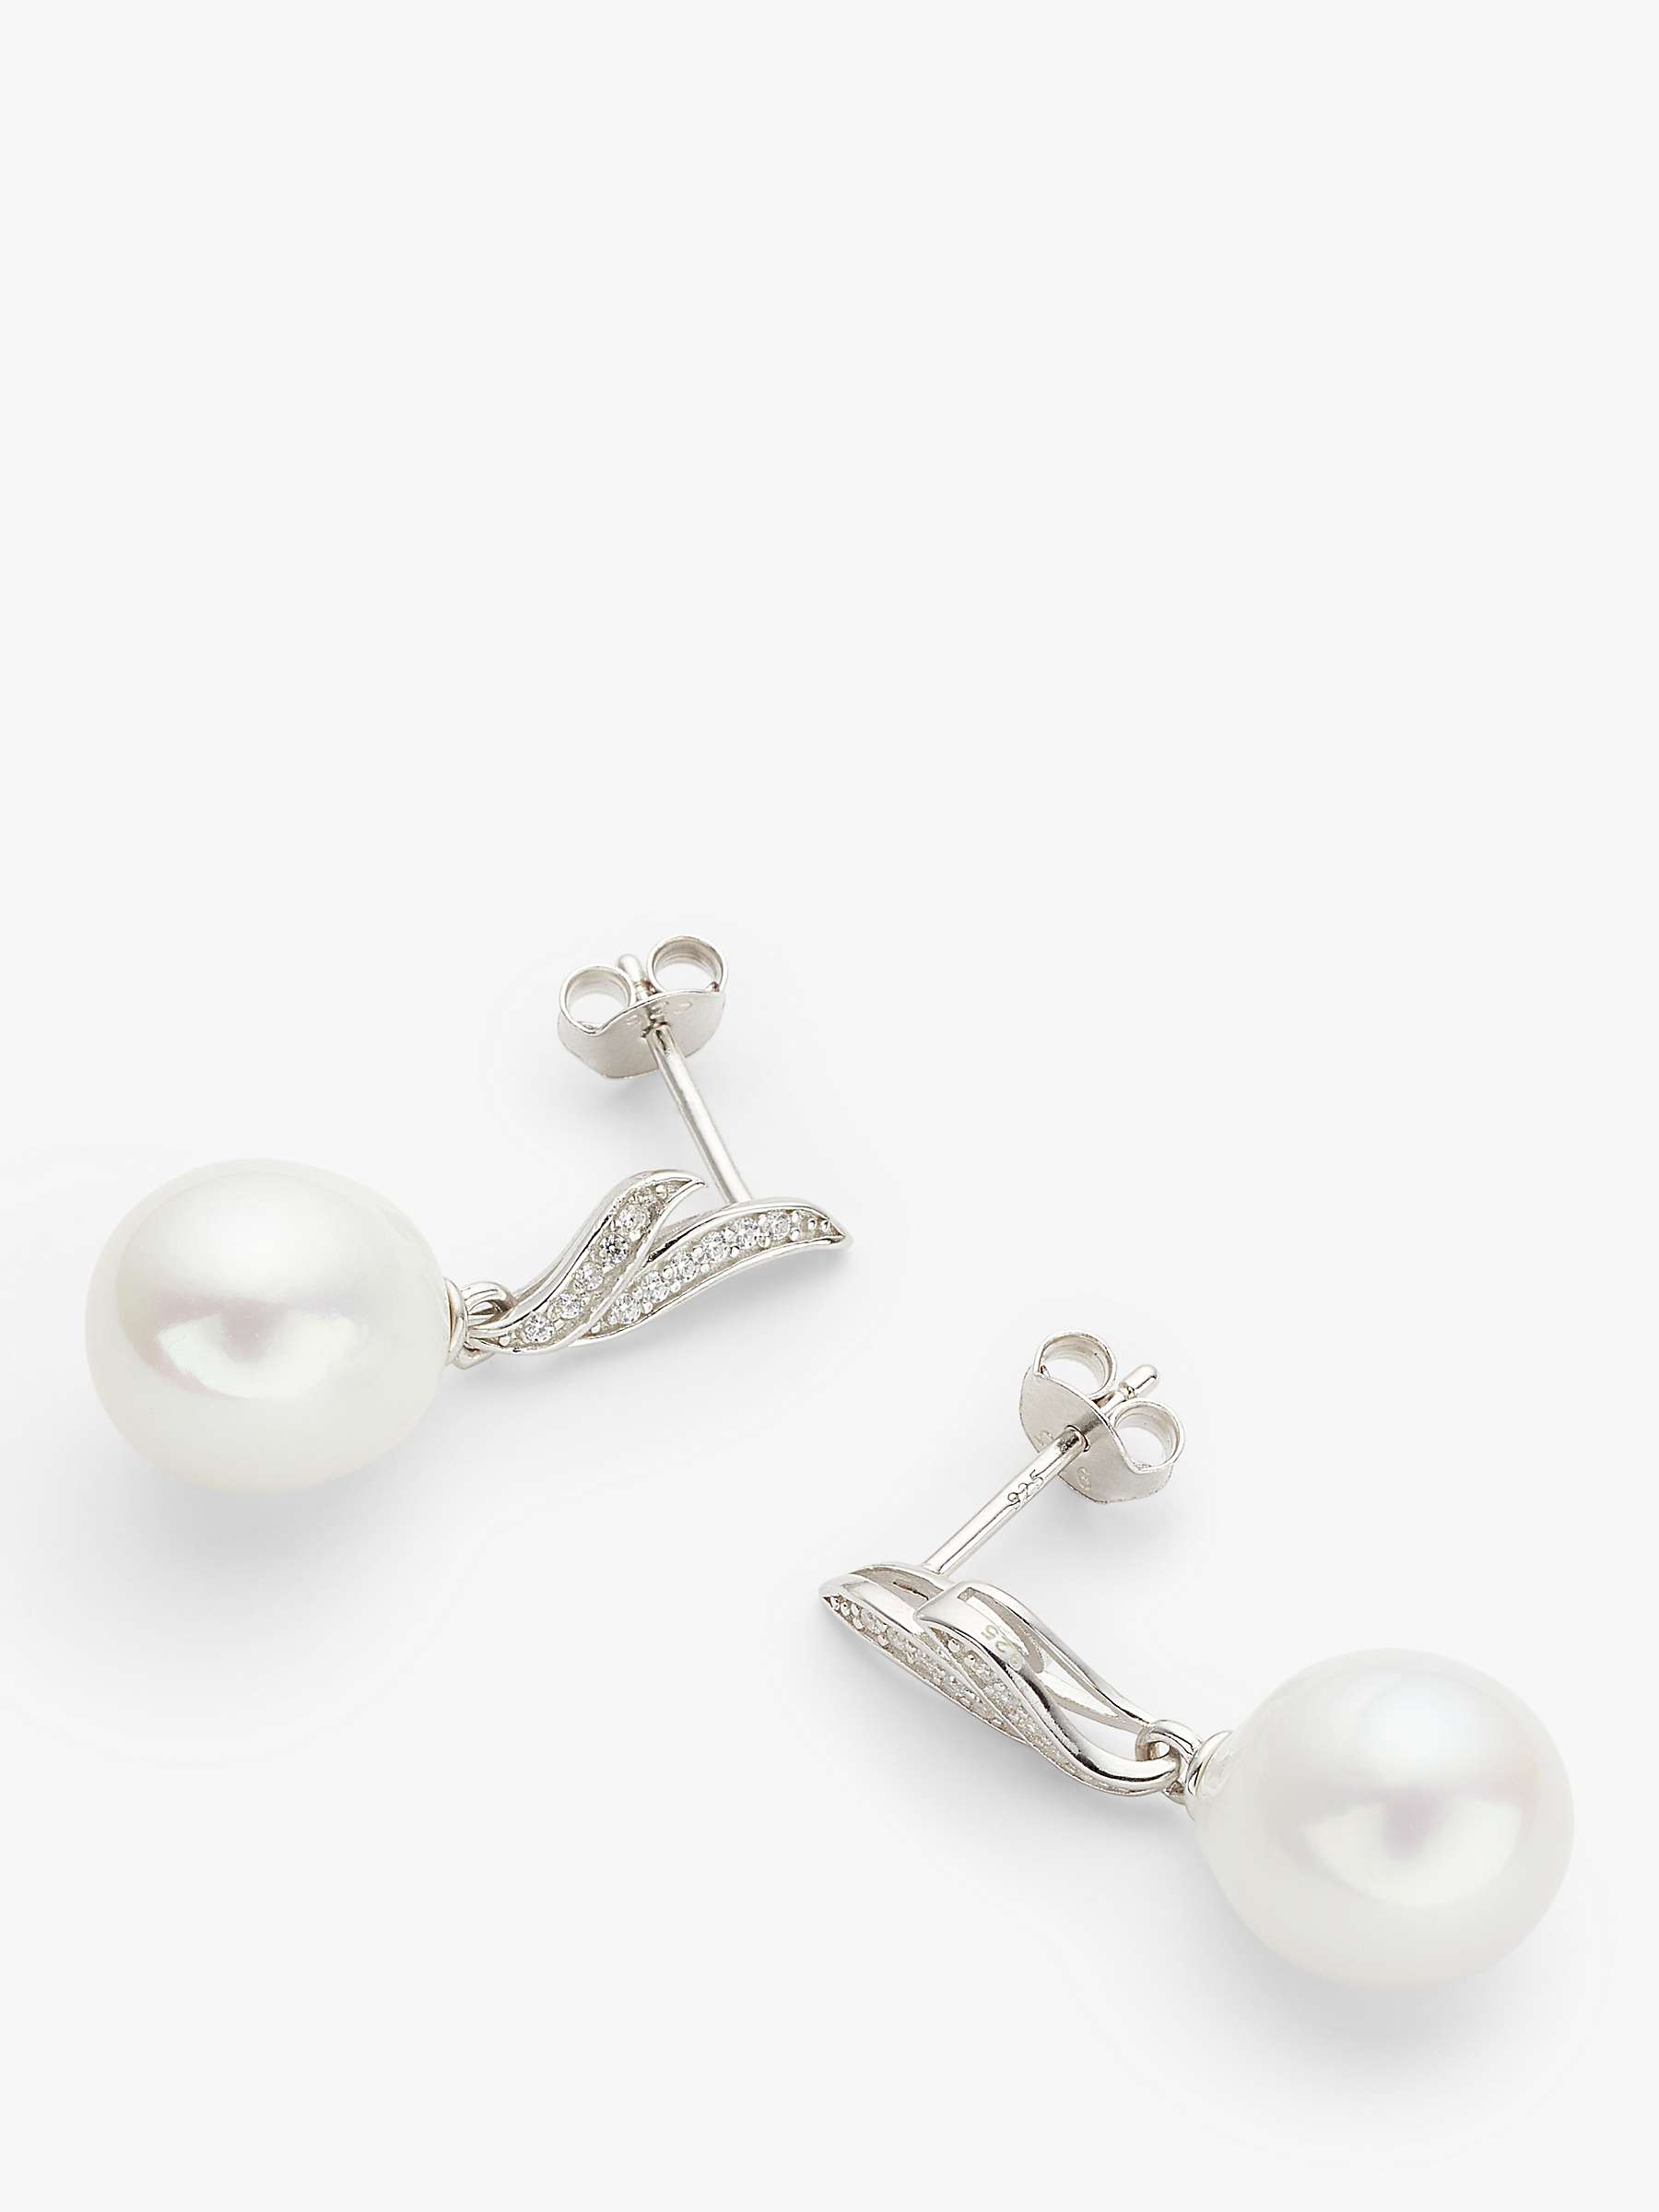 Buy Lido Cubic Zirconia Freshwater Pearl Double Leaf Stud Earrings, White/Silver Online at johnlewis.com